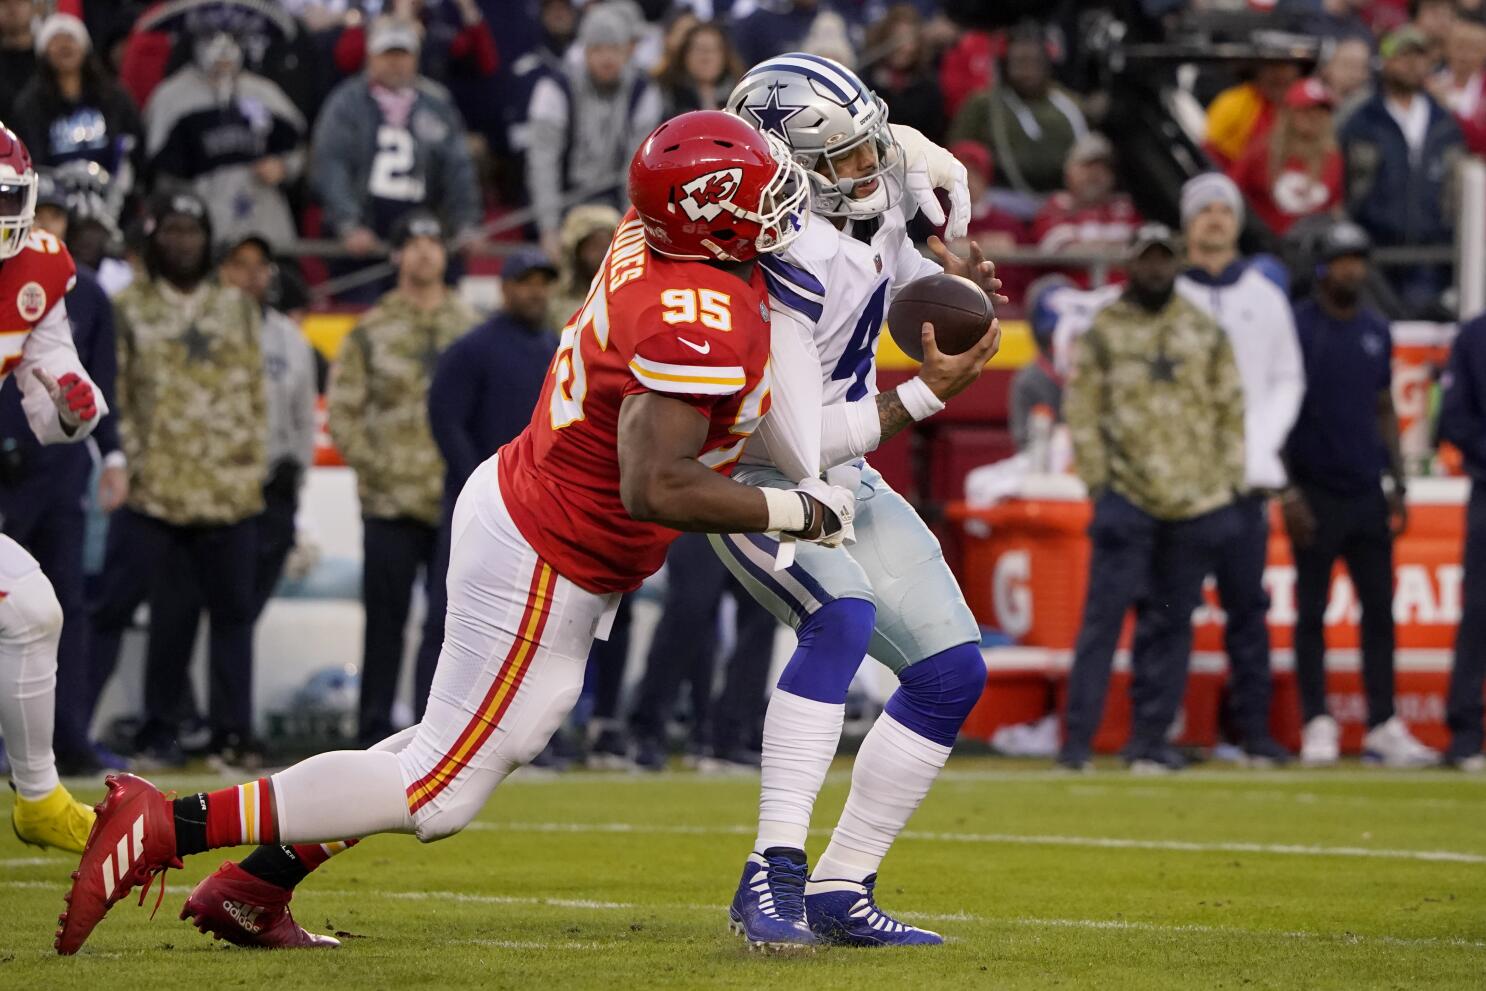 Chiefs hold Cowboys without TD, show they're still dangerous - The